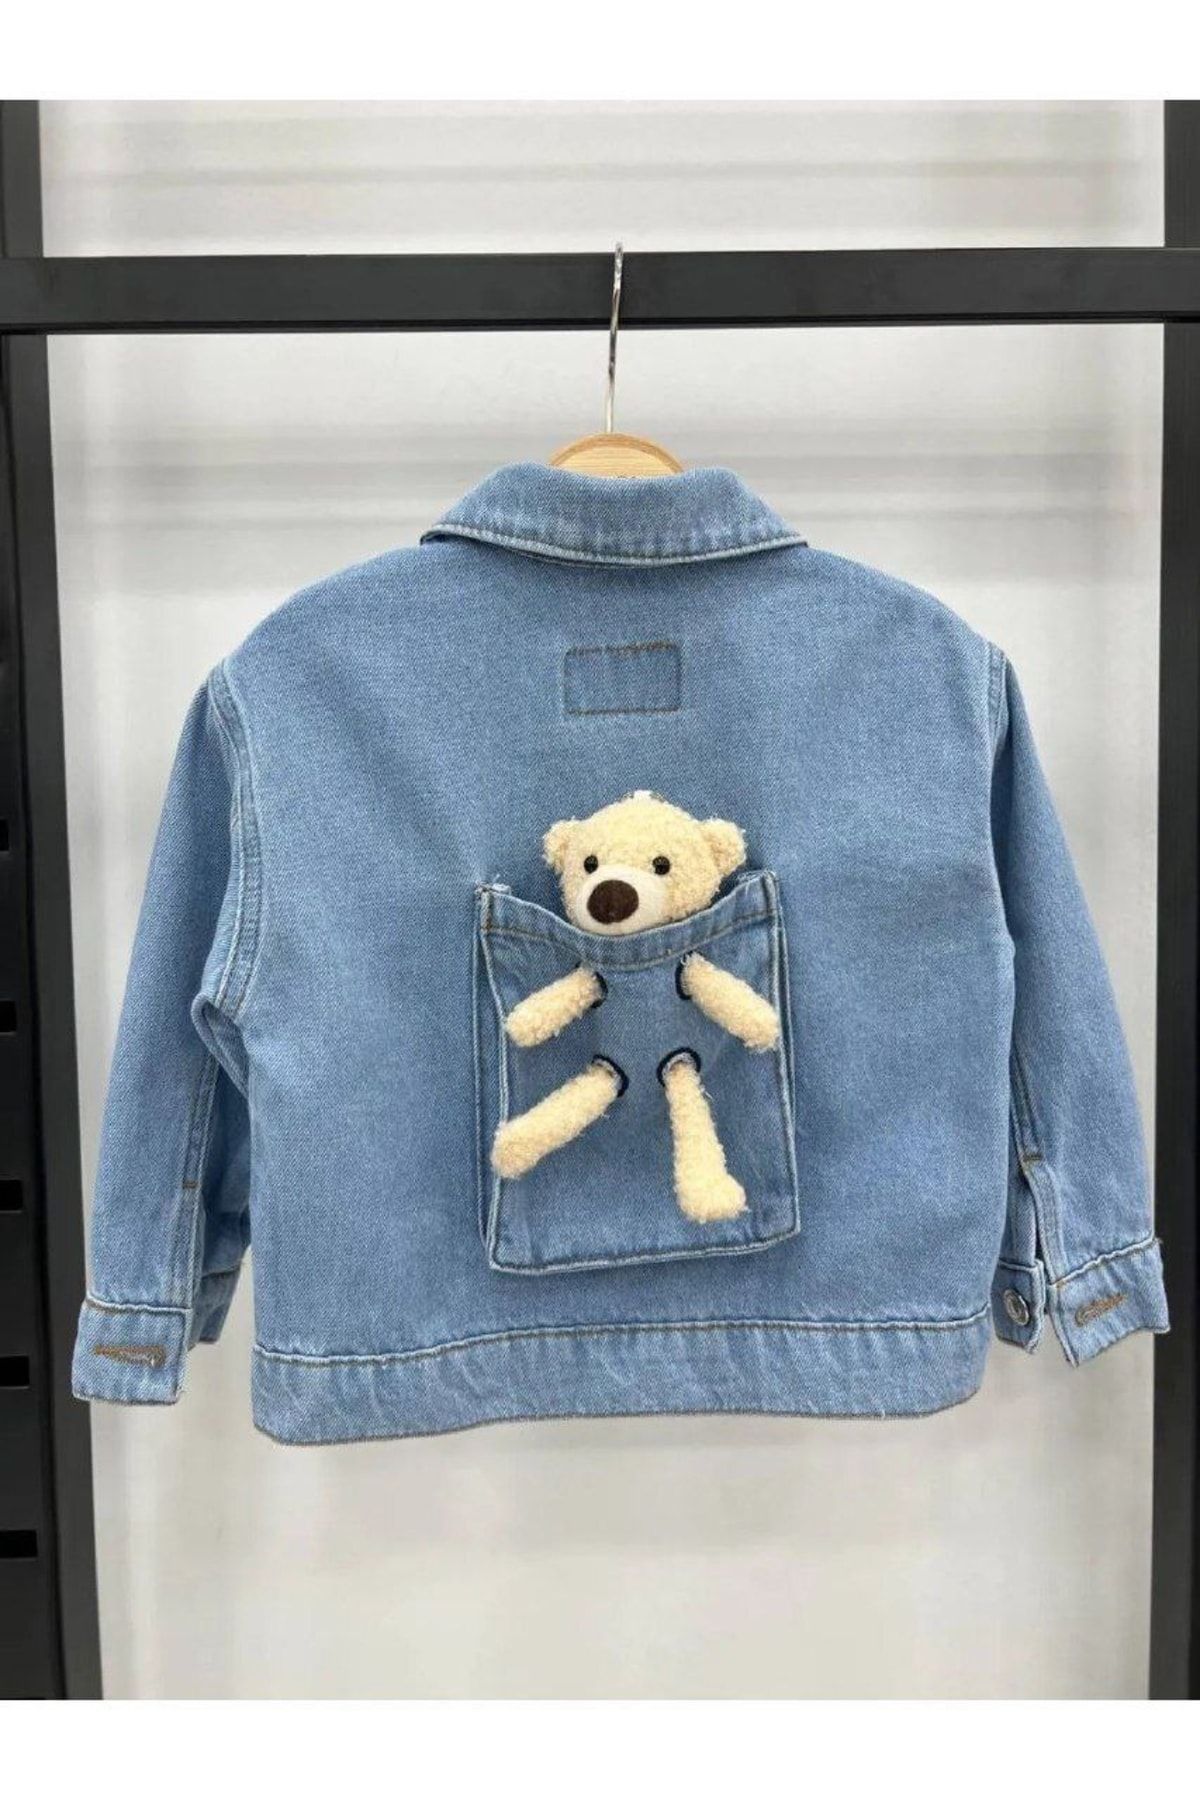 Daily Crafts Unisex Sew on Embroidered Denim Jacket Jeans Dress Patch for  Clothing (Hey Teddy Bear(H 12Cm, W 10Cm)) : Amazon.in: Home & Kitchen